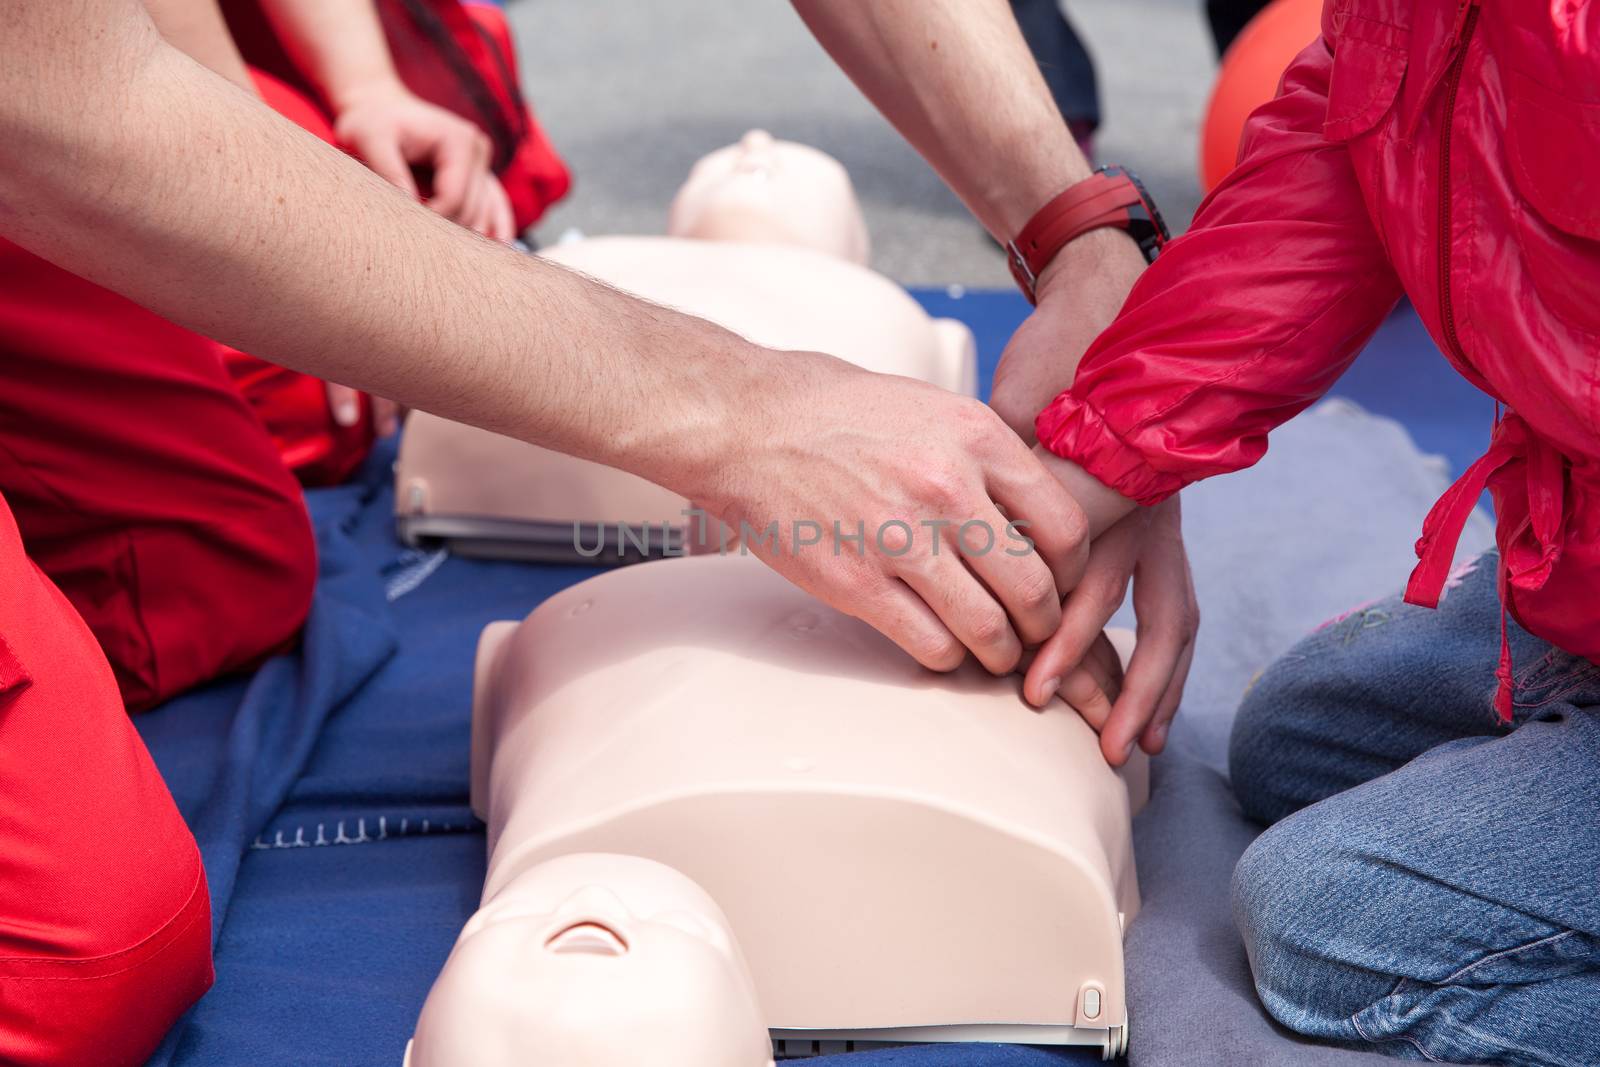 First aid training detail by wellphoto